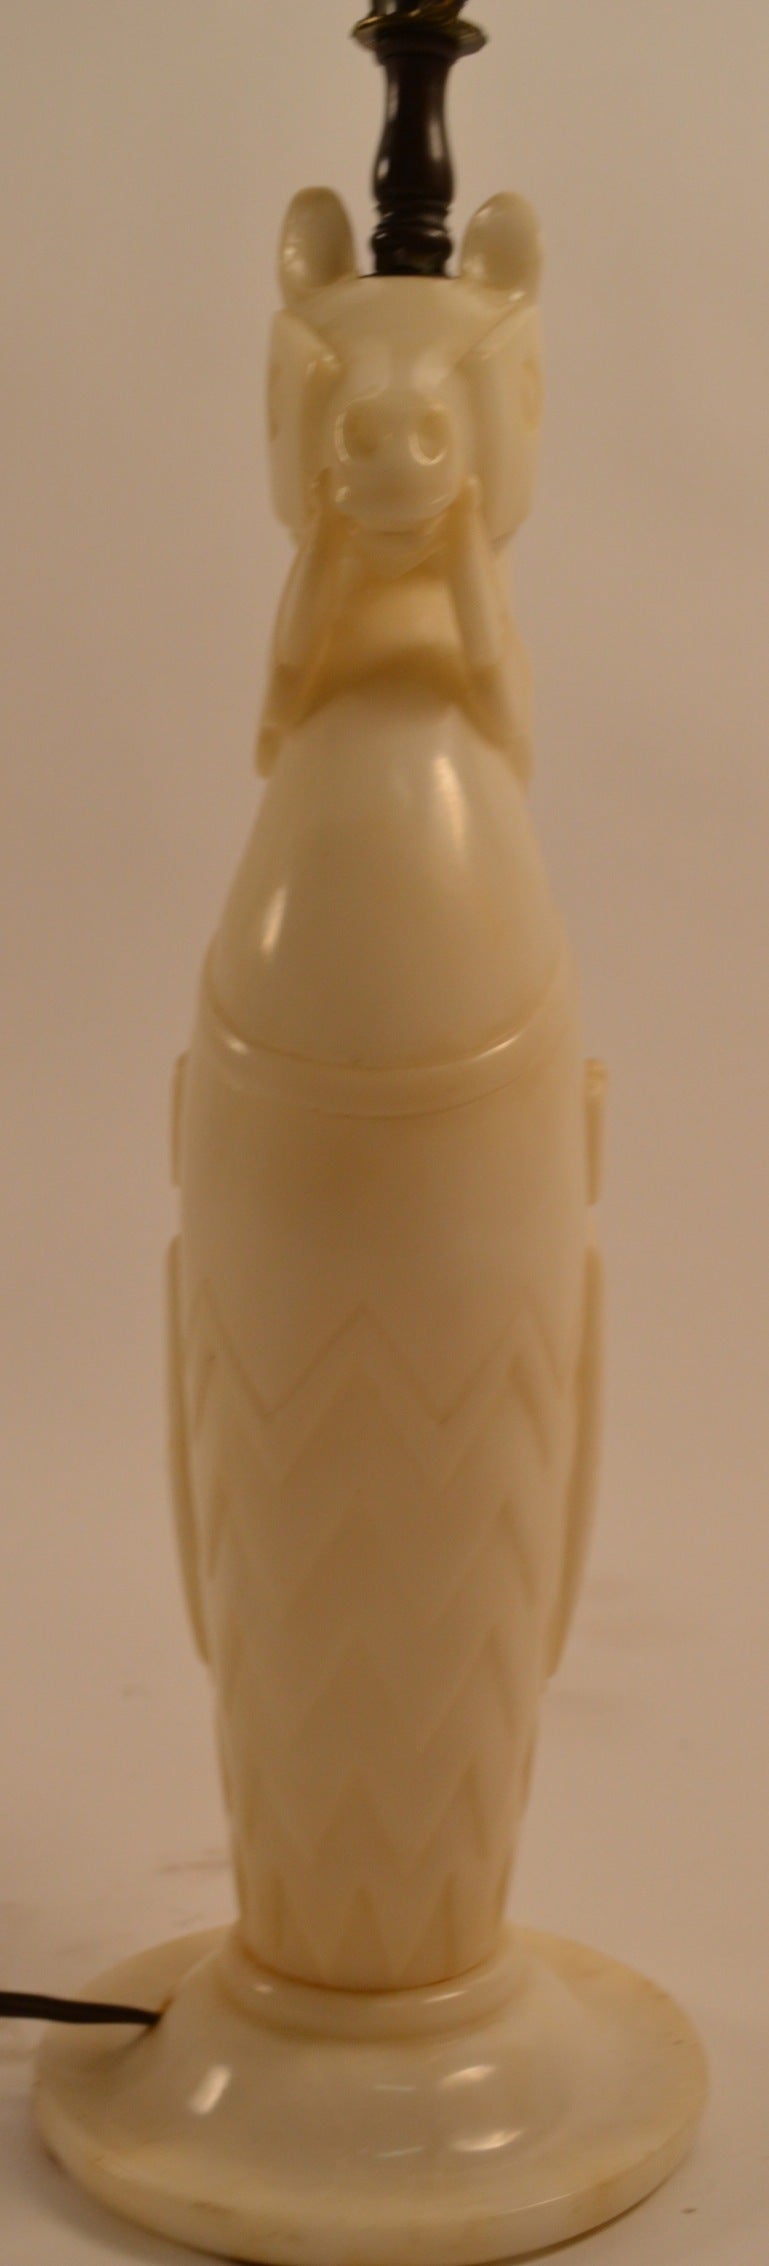 Carved Alabaster Lamp in the form of a Knights Horse